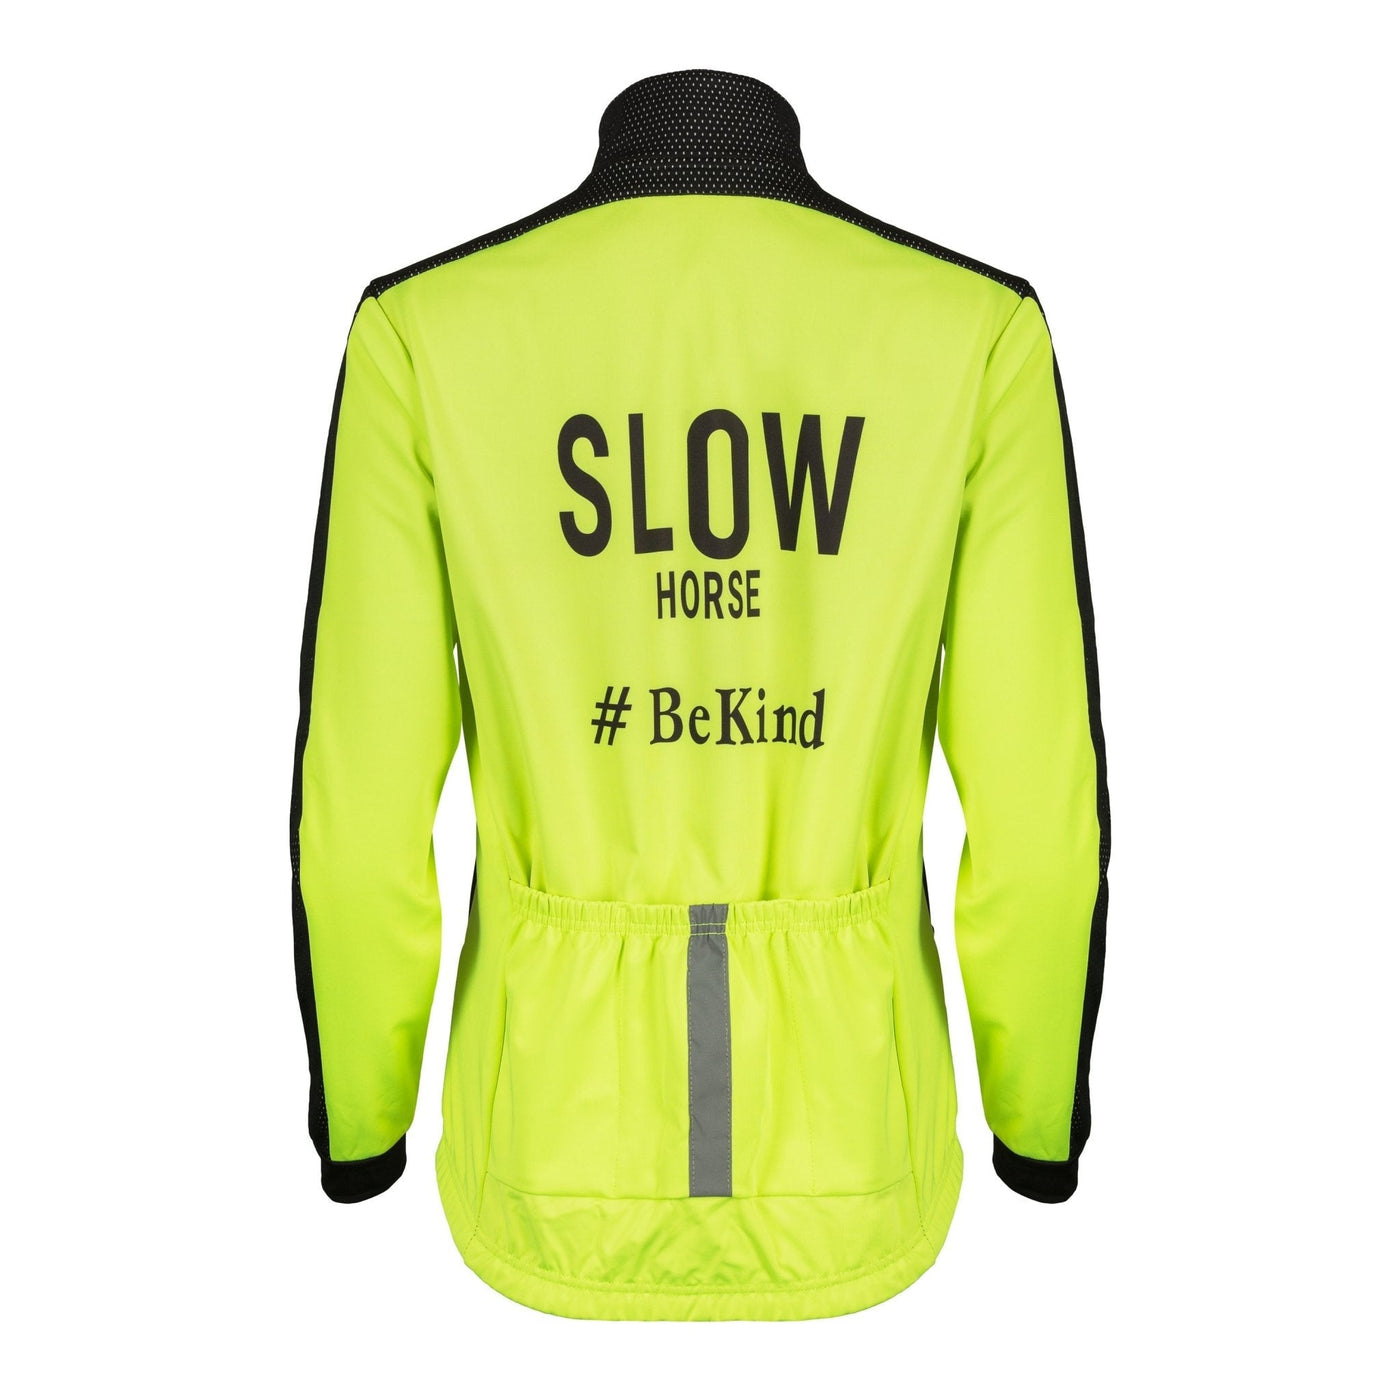 Hi Vis Safety Jacket - Micro fleece lined for warmth but breathability. Mesh Black over laser cut panelling design. Reflective print. #BeKind Traffic slogan, 3 deep elasticated back pockets and a wide comfort hybrid neck. Reflective strips down both sides of the zip for extra safety and night reflection. We have also made the neck fasten wider so it doesn’t run your chin when riding - Horzehoods